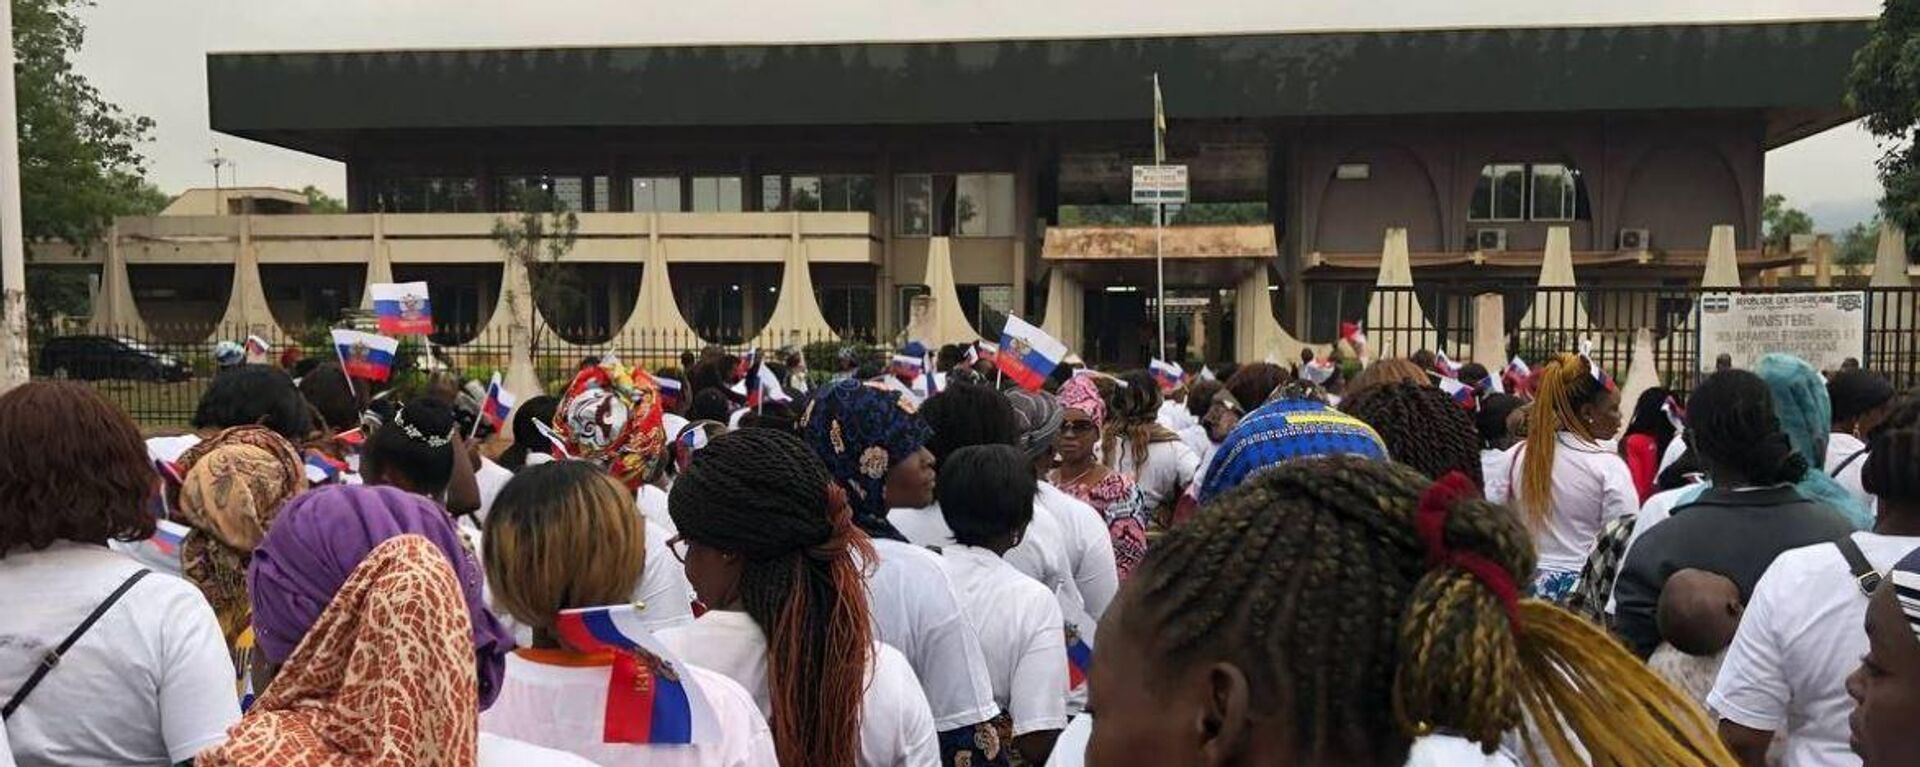 On March 8, on the occasion of International Women's Day, the social movement A Mama ti Touadéra organized a rally in front of the Russian Embassy in Bangui, the Central African Republic (CAR), in support of friendly ties between the two countries. - Sputnik International, 1920, 08.03.2023